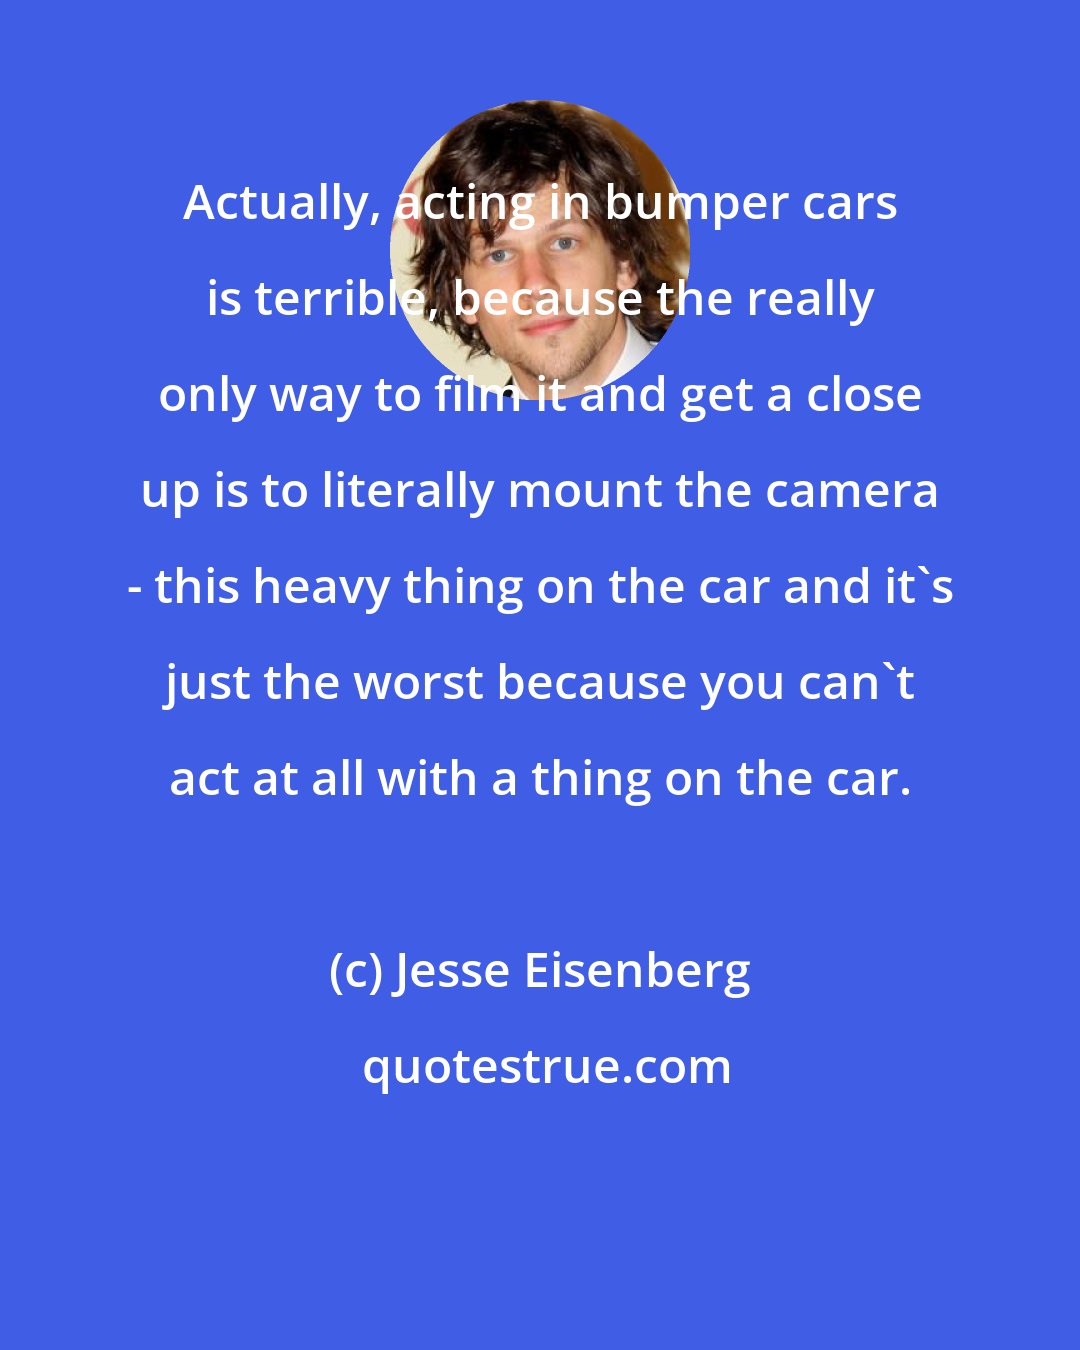 Jesse Eisenberg: Actually, acting in bumper cars is terrible, because the really only way to film it and get a close up is to literally mount the camera - this heavy thing on the car and it's just the worst because you can't act at all with a thing on the car.